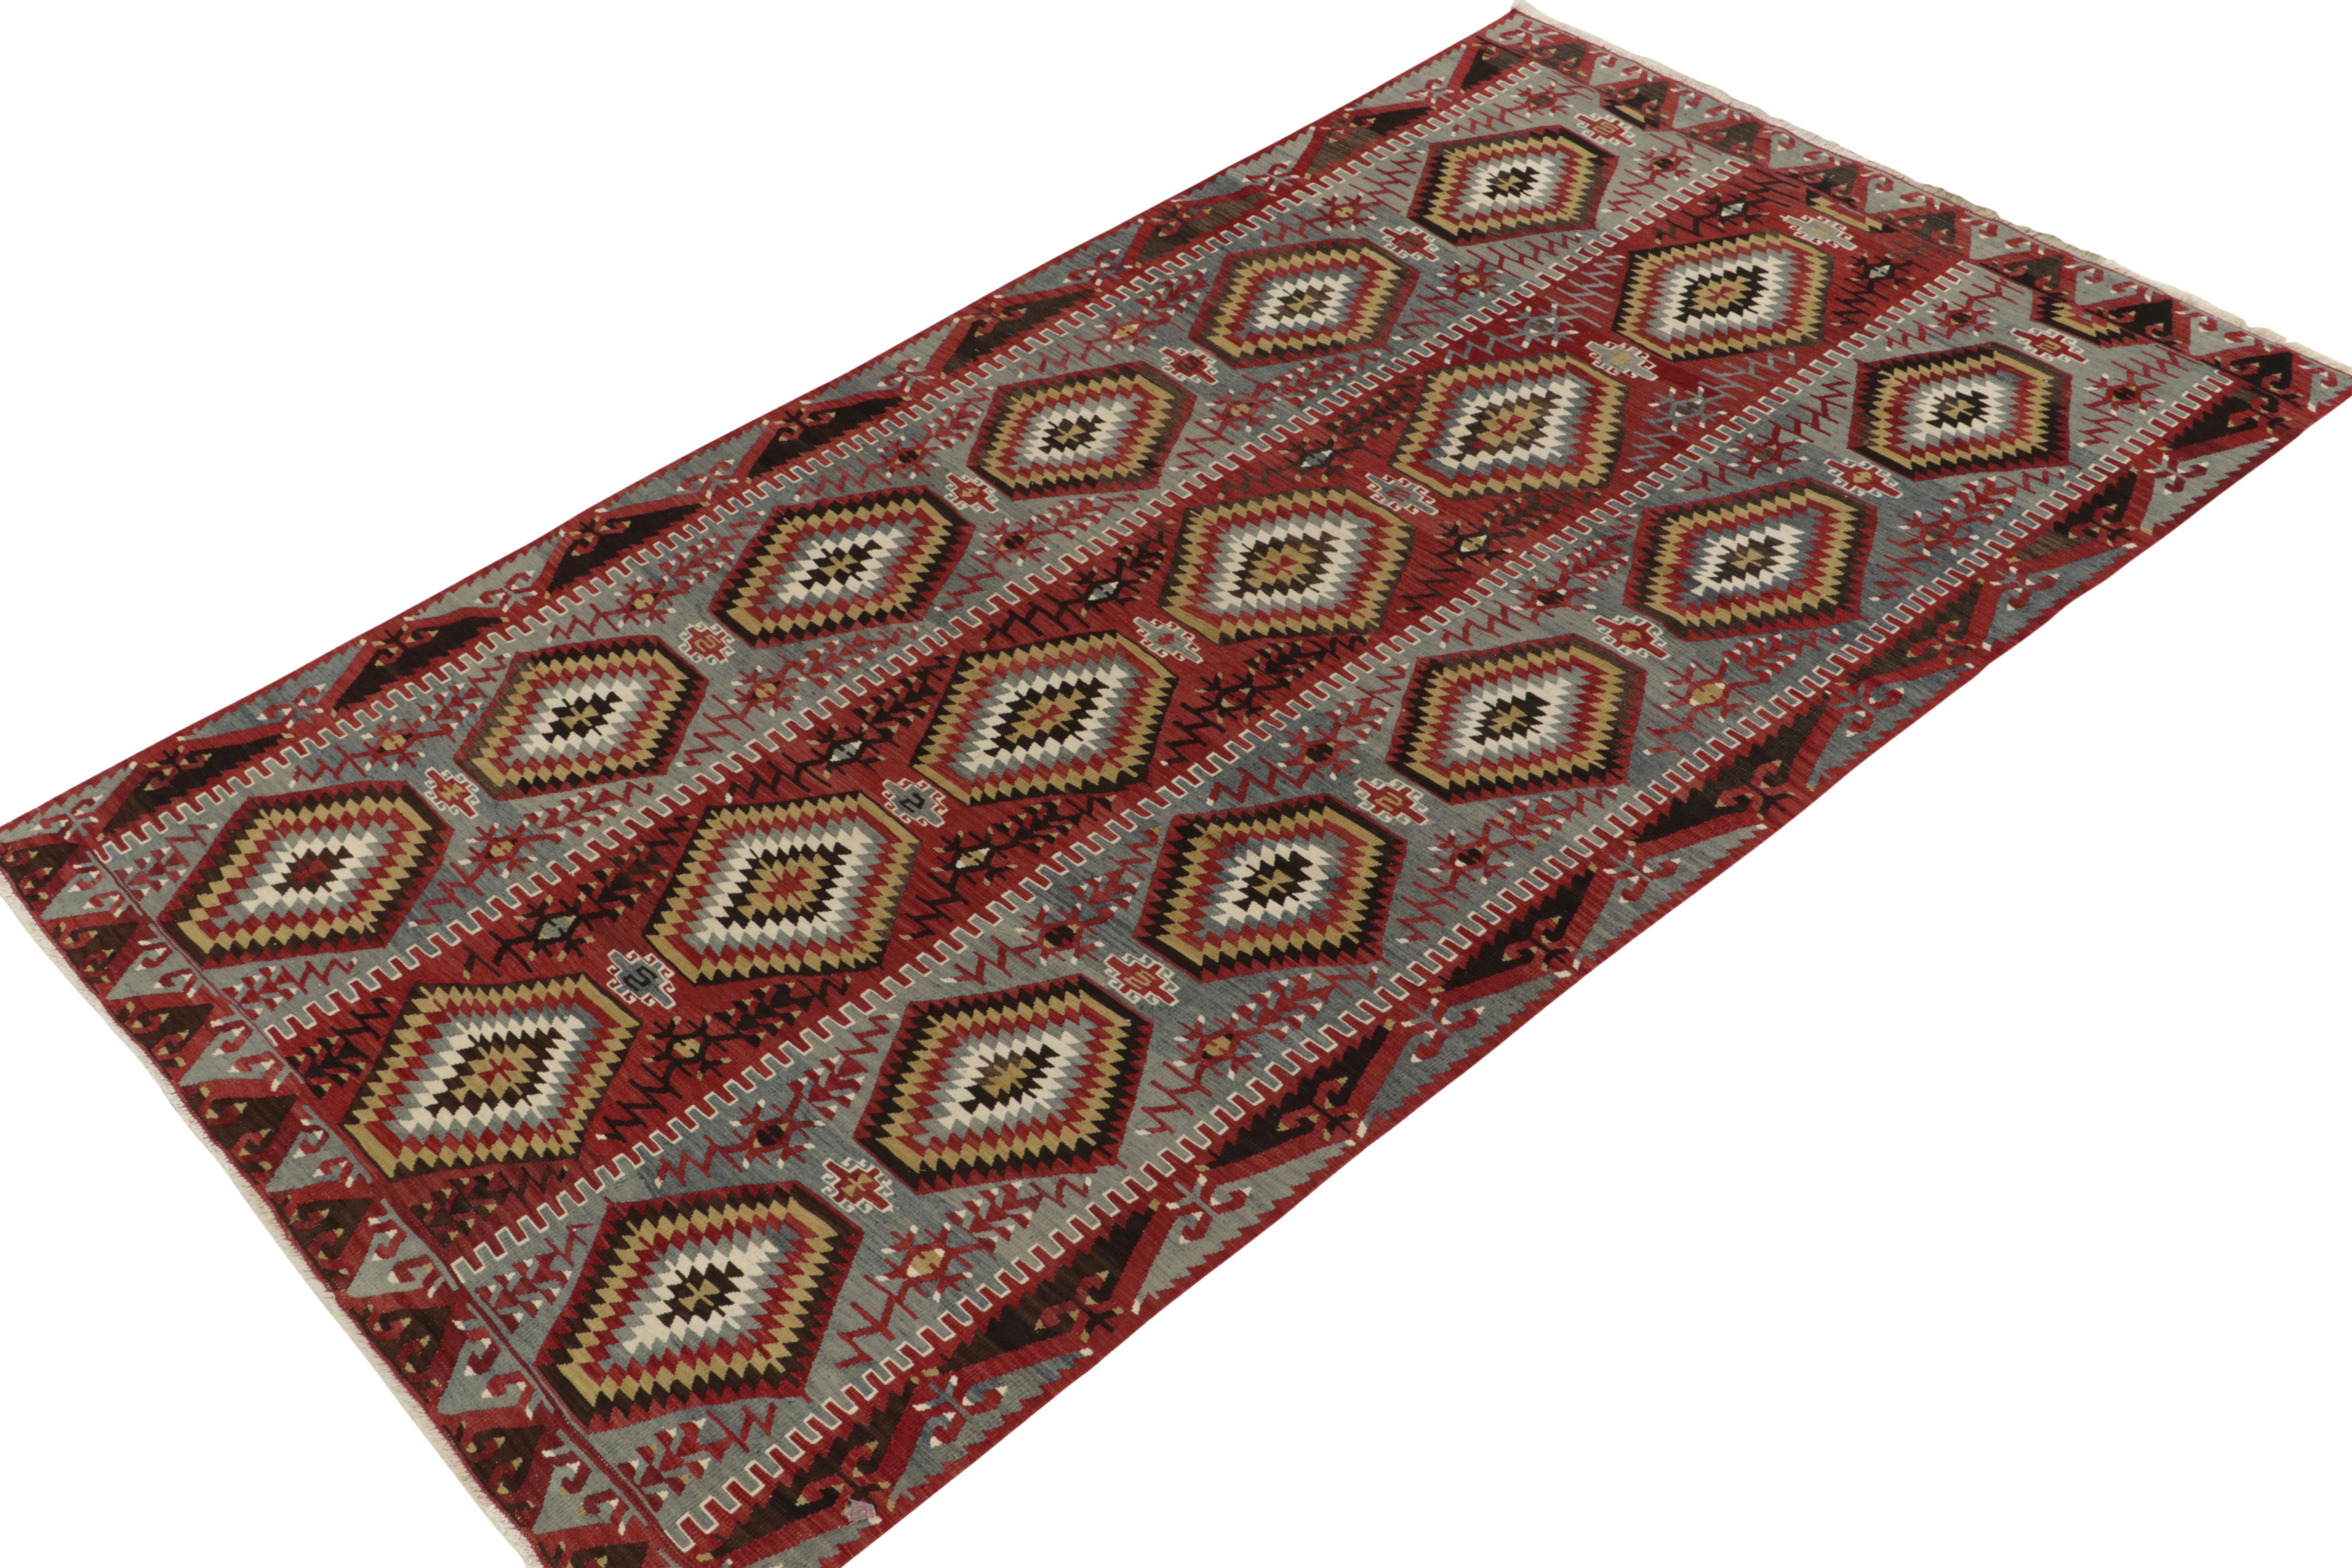 Hailing from Turkey circa 1940s, a mid-century kilim rug now joining Rug & Kilim’s vintage tribal selections. Specifically an Esme Kilim, this edition of the coveted regional style revels in rare blue tones with red, white, black & beige rendering a